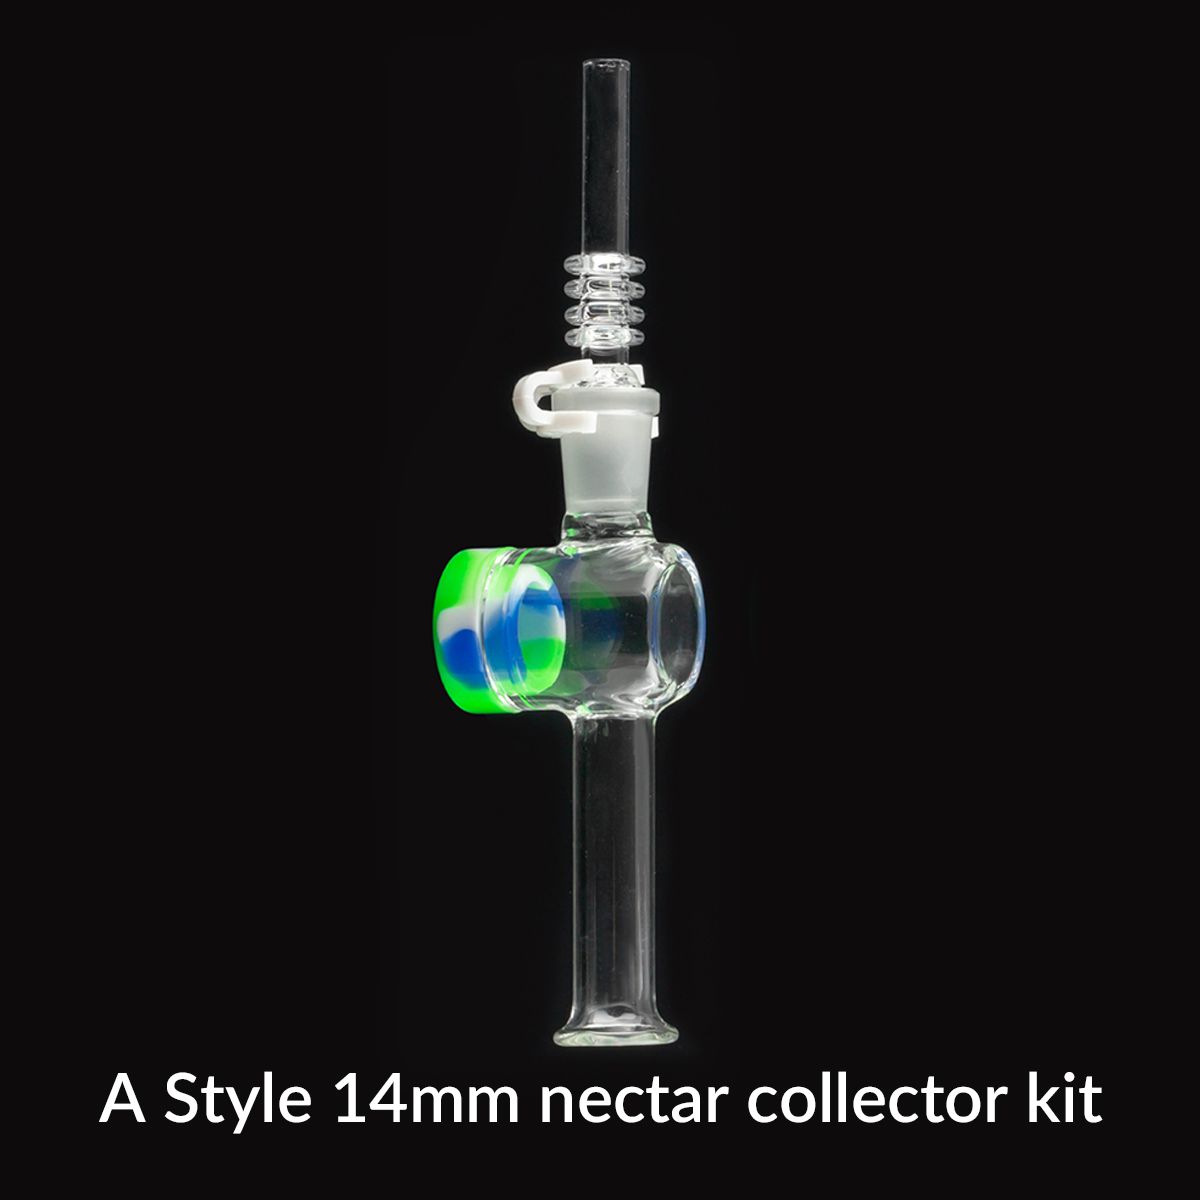 A Style 14mm nector collector kit